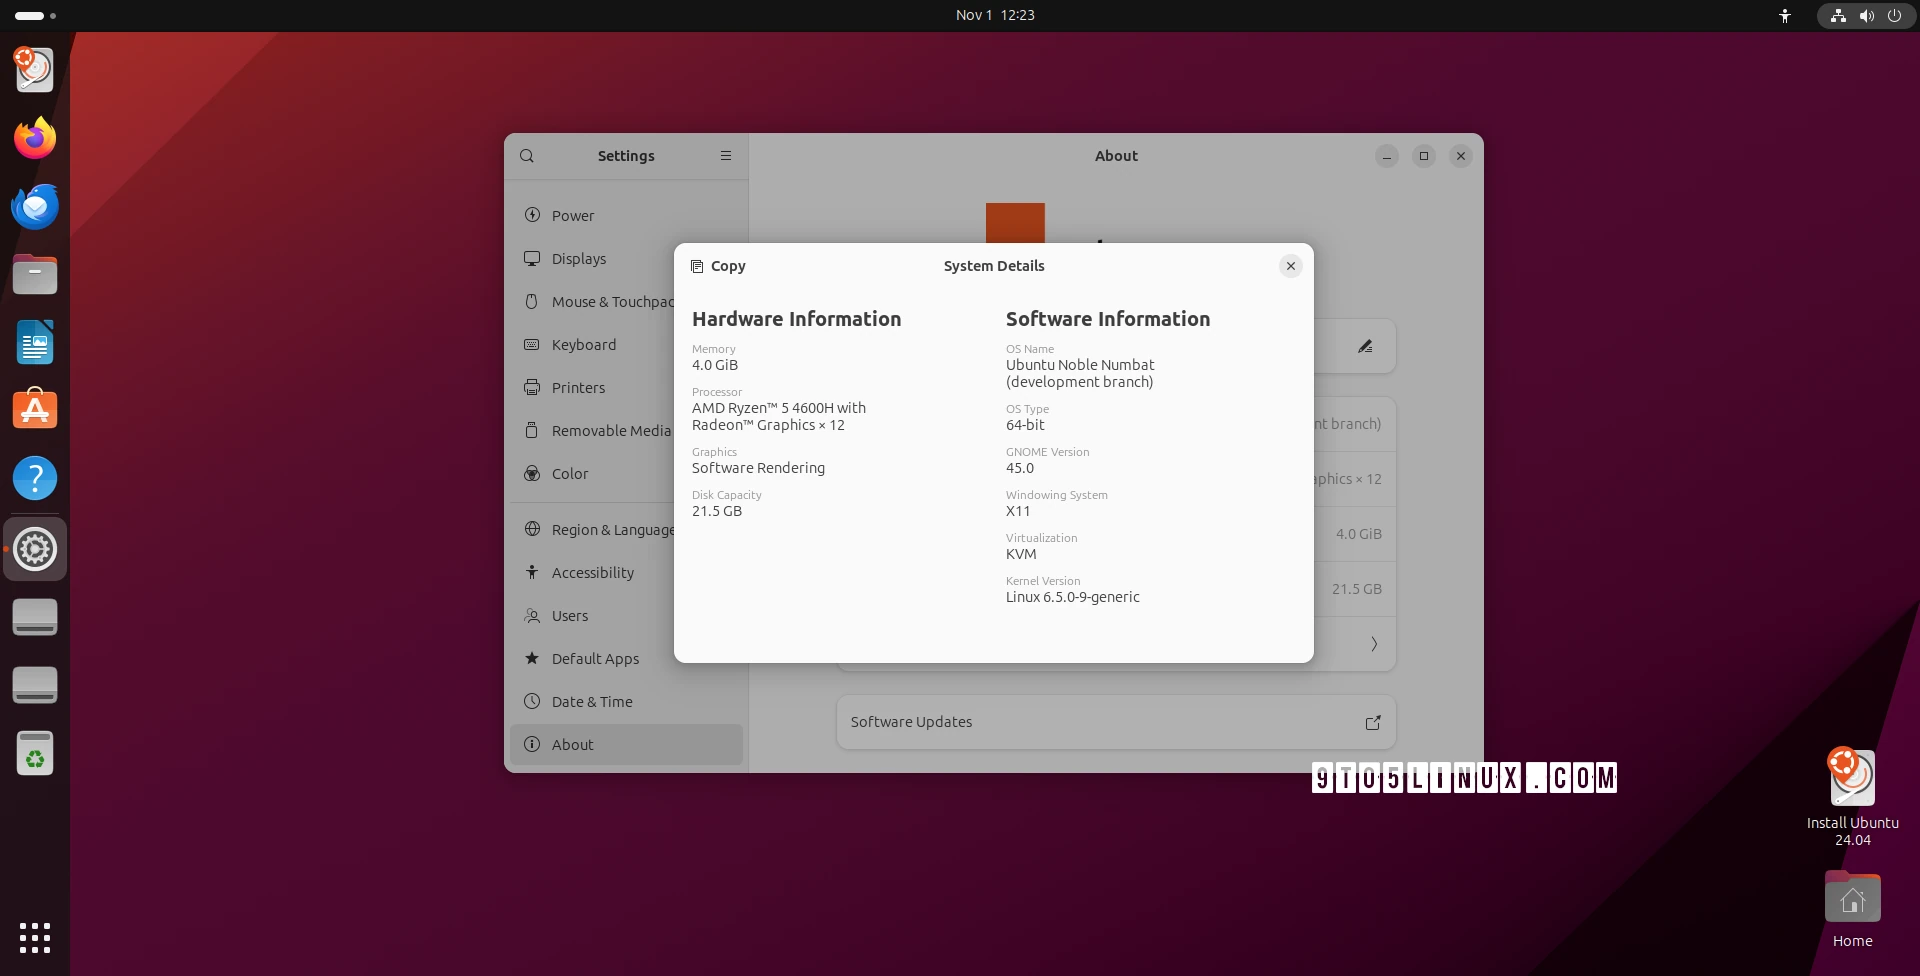 Ubuntu 24.04 LTS (Noble Numbat) Daily Build ISOs Are Now Available for Download